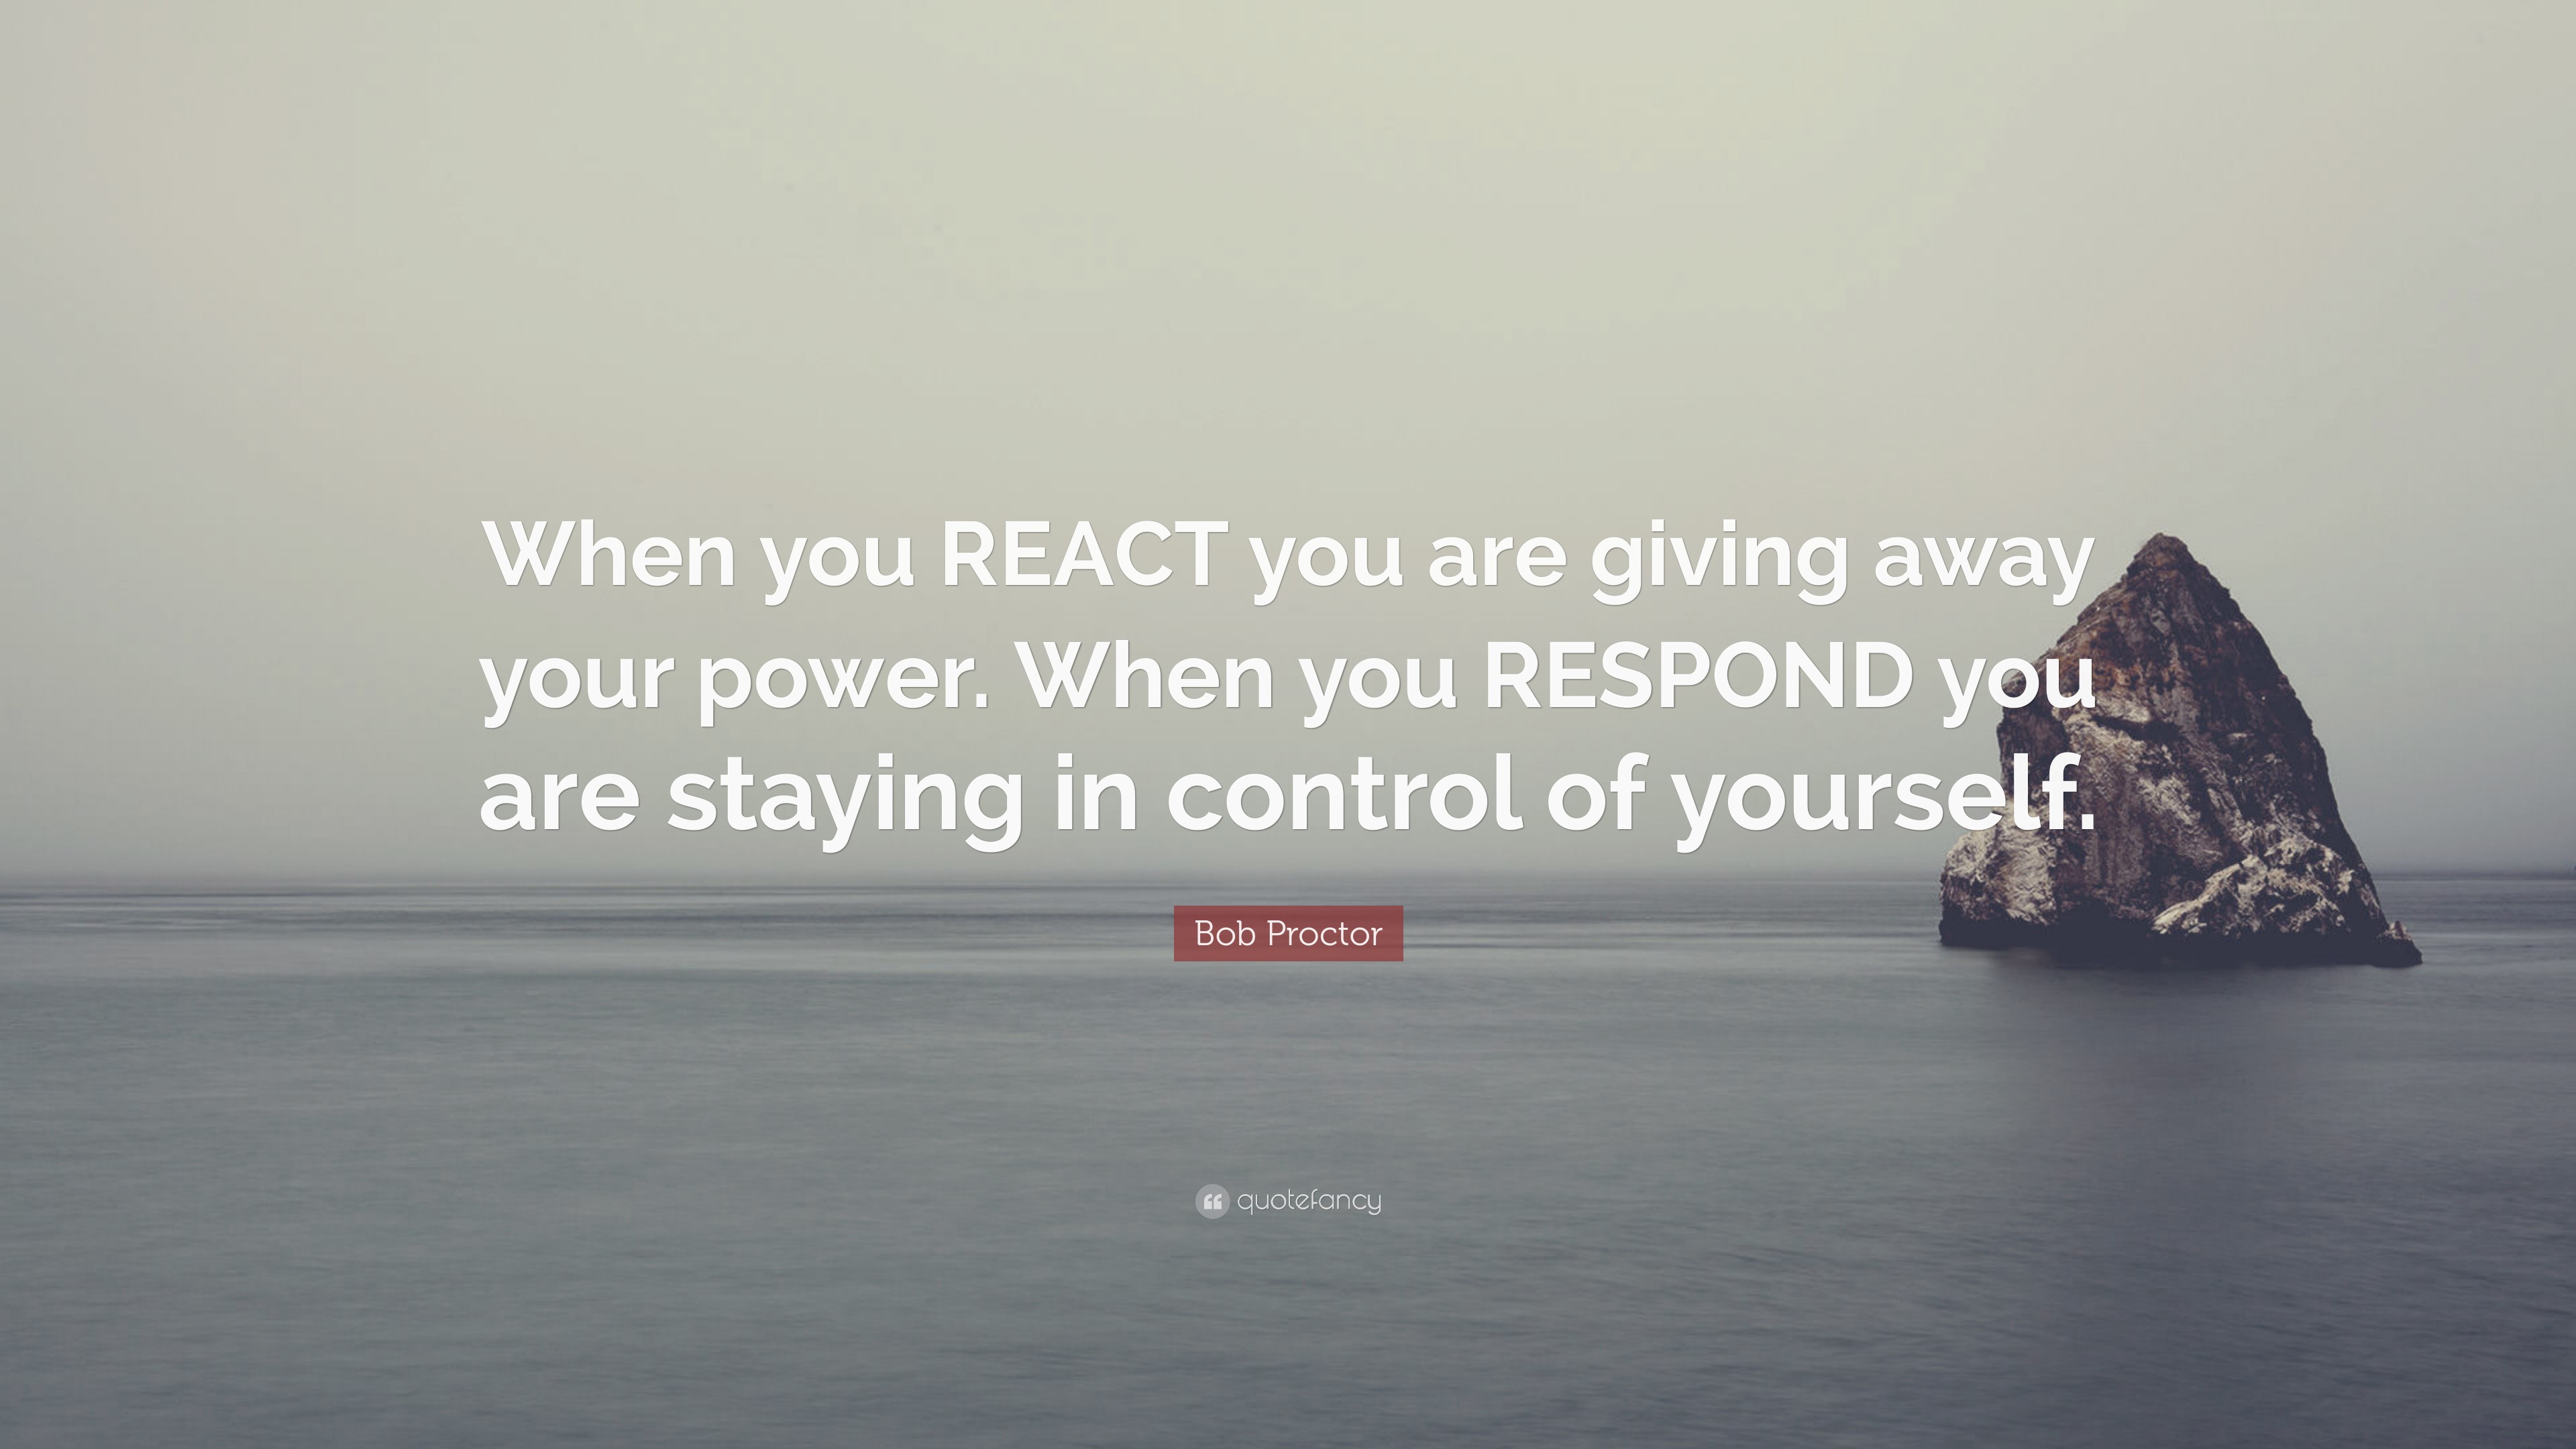 https://quotefancy.com/media/wallpaper/3840x2160/4760128-Bob-Proctor-Quote-When-you-REACT-you-are-giving-away-your-power.jpg